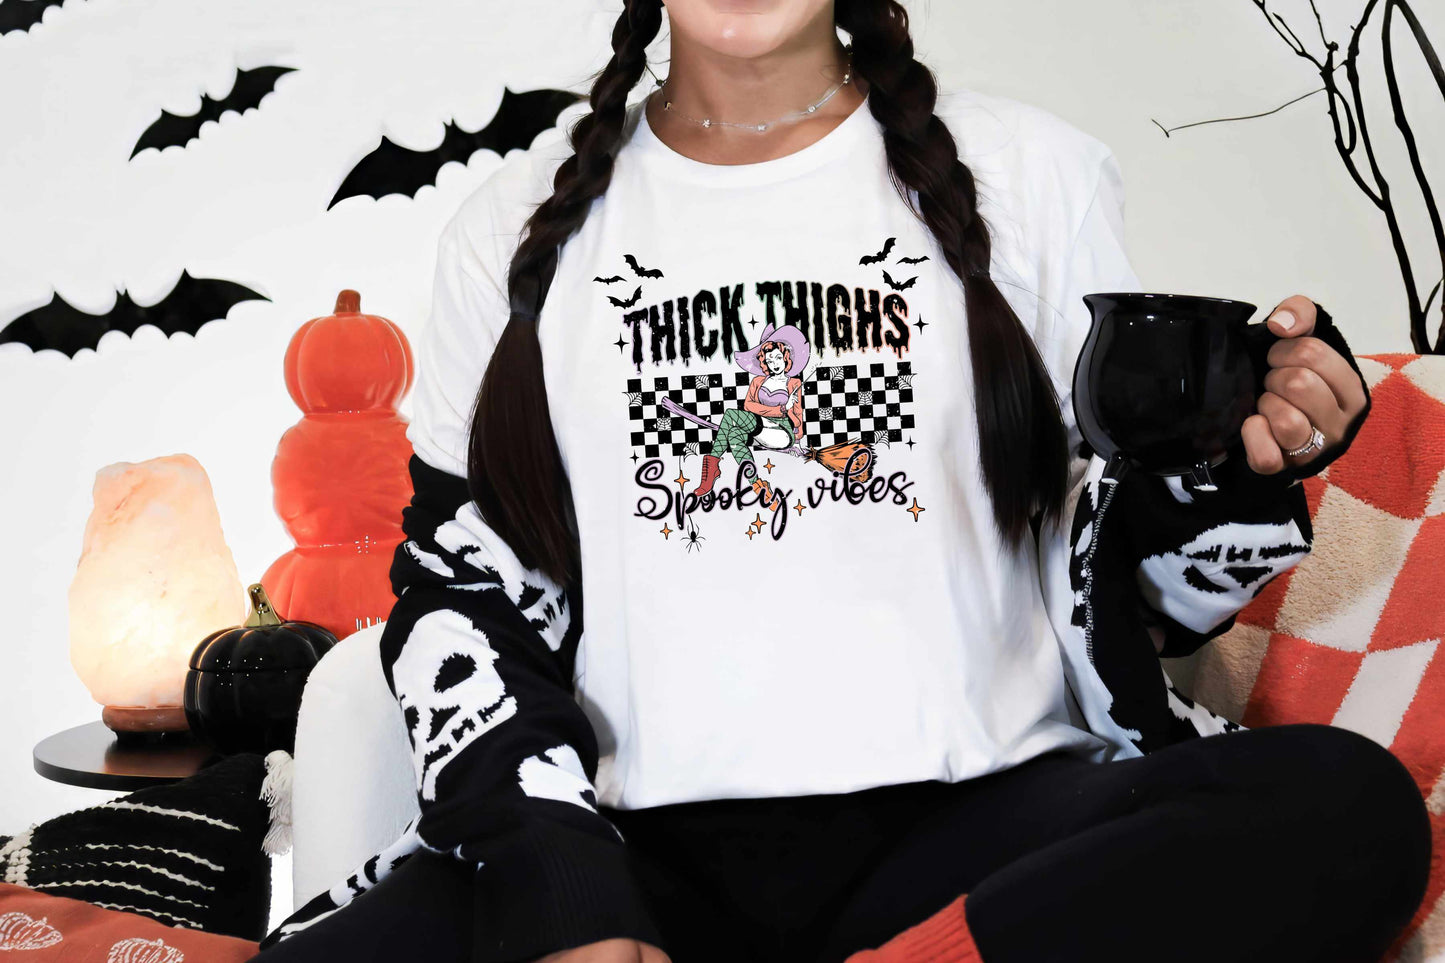 THICK THIGHS SPOOKY VIBES (DTF) 357PO